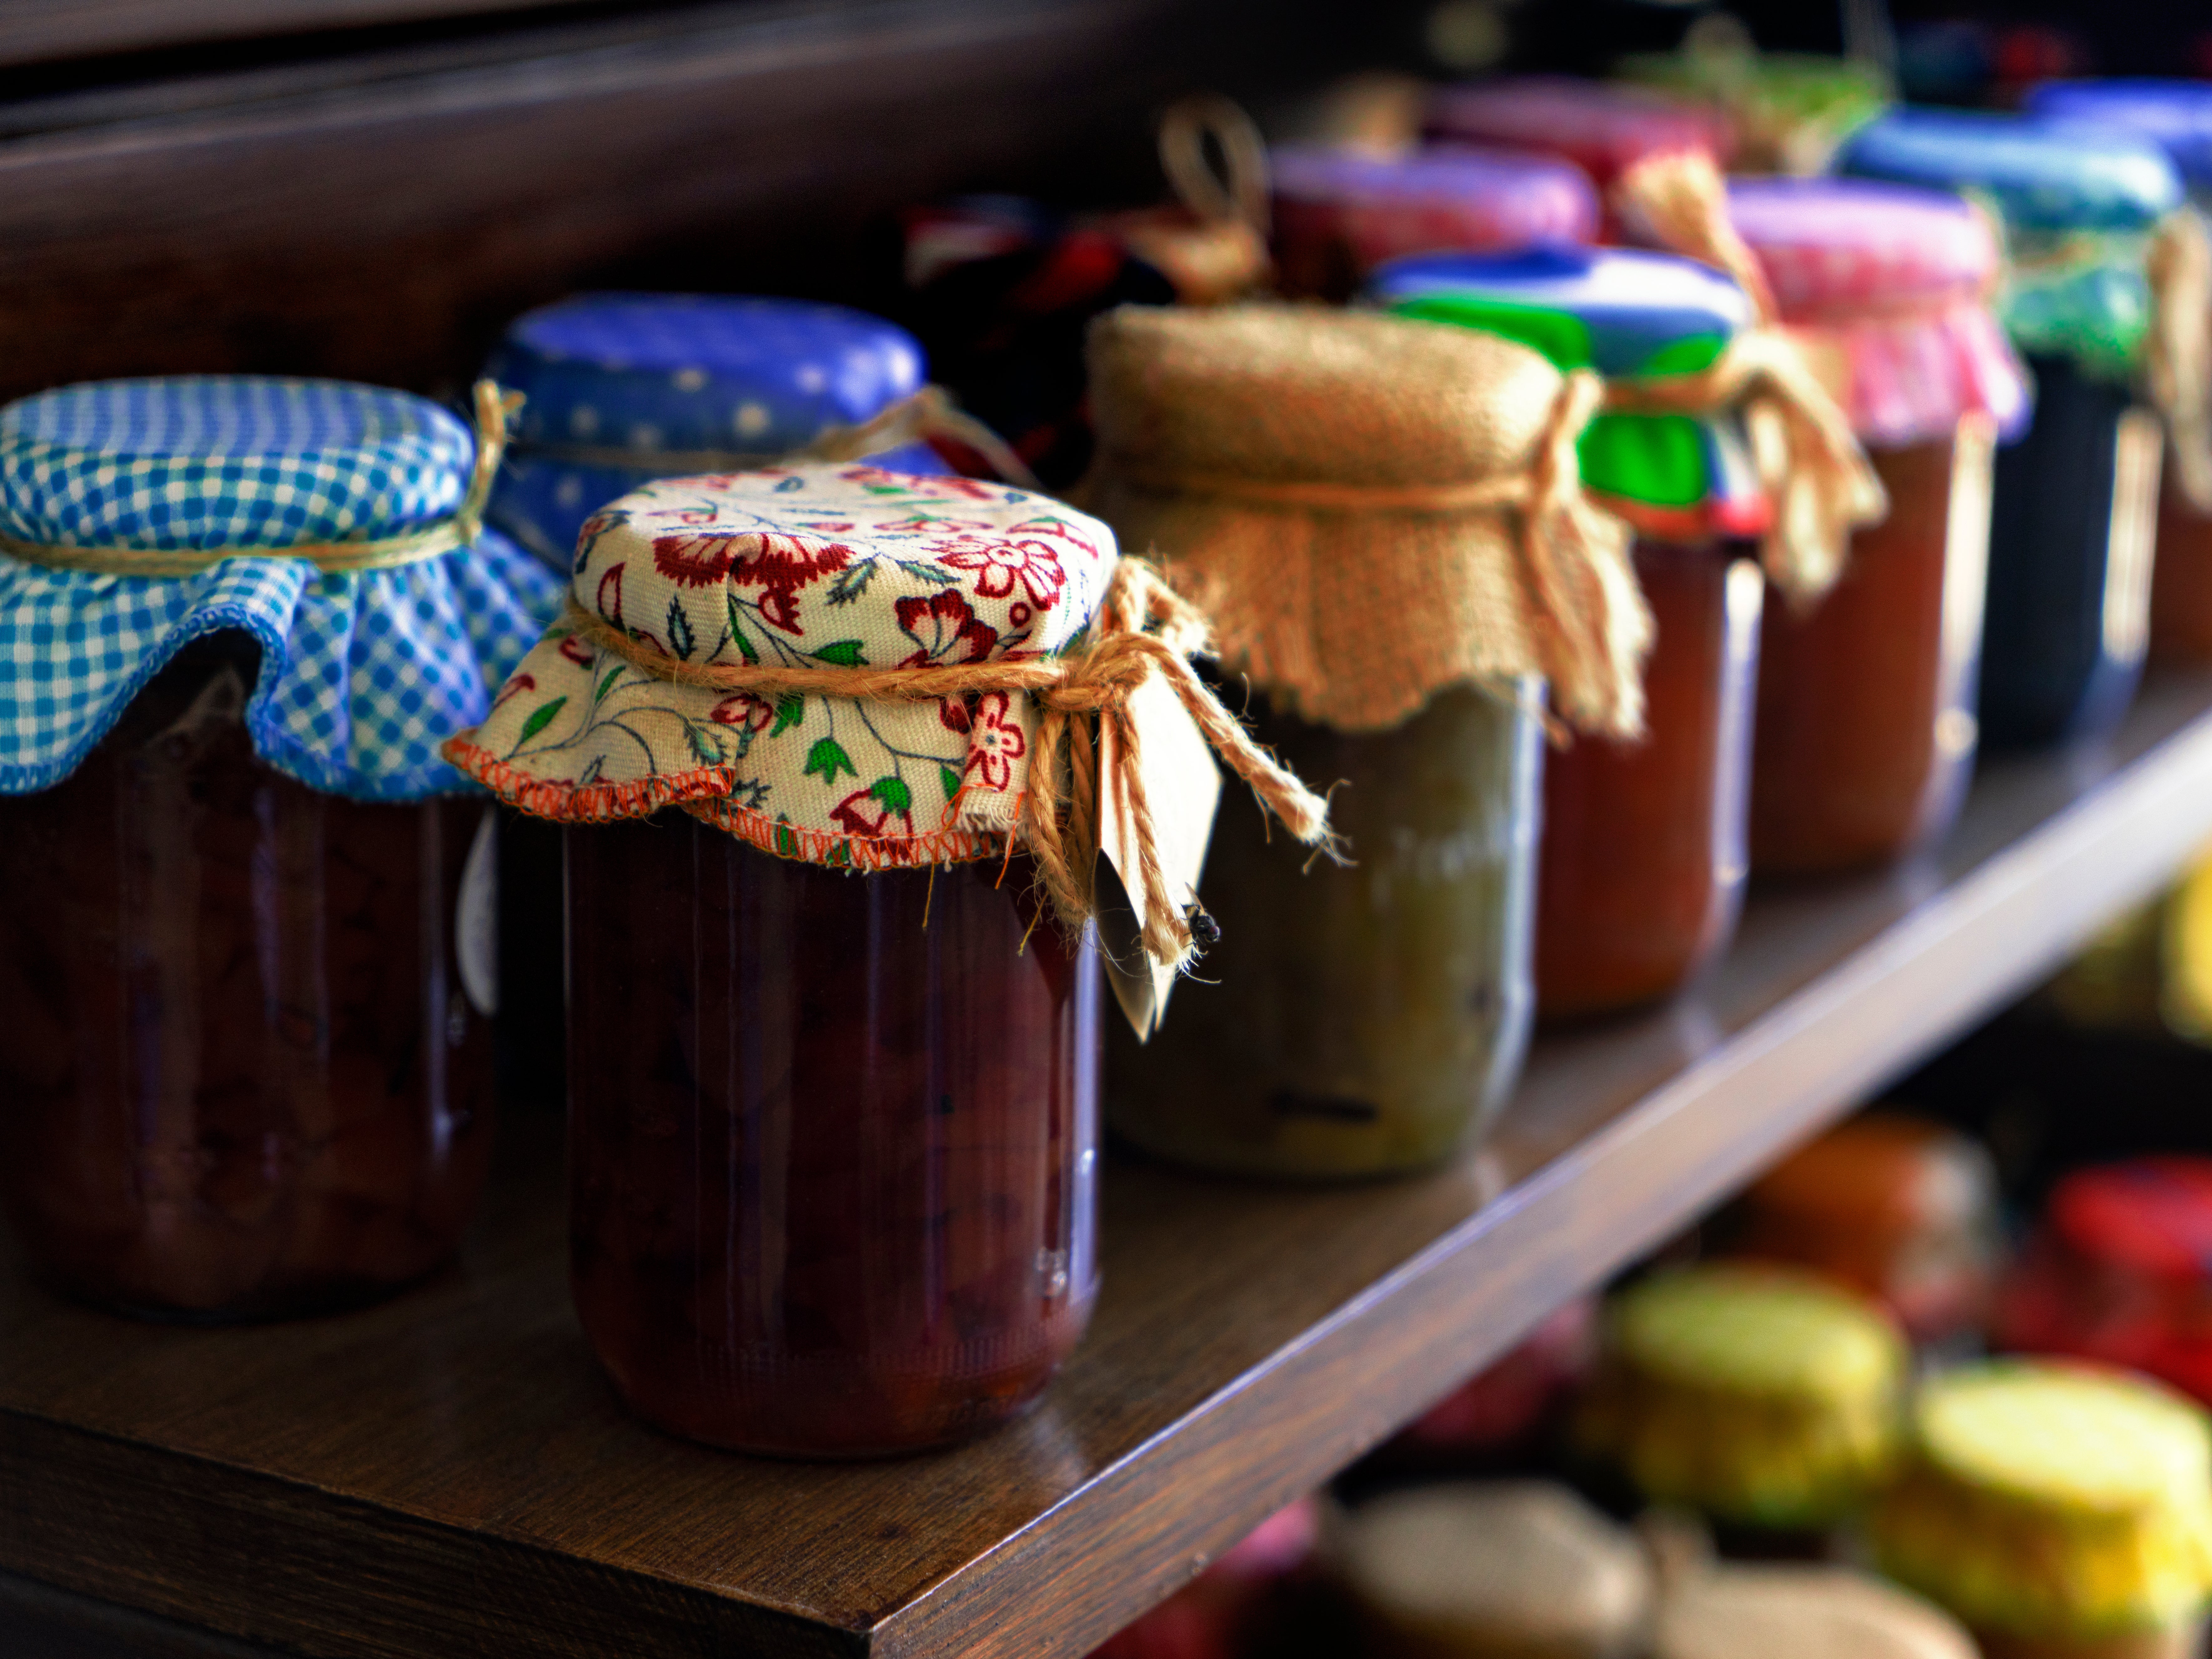 Making preserves is a process you’ll either love or hate